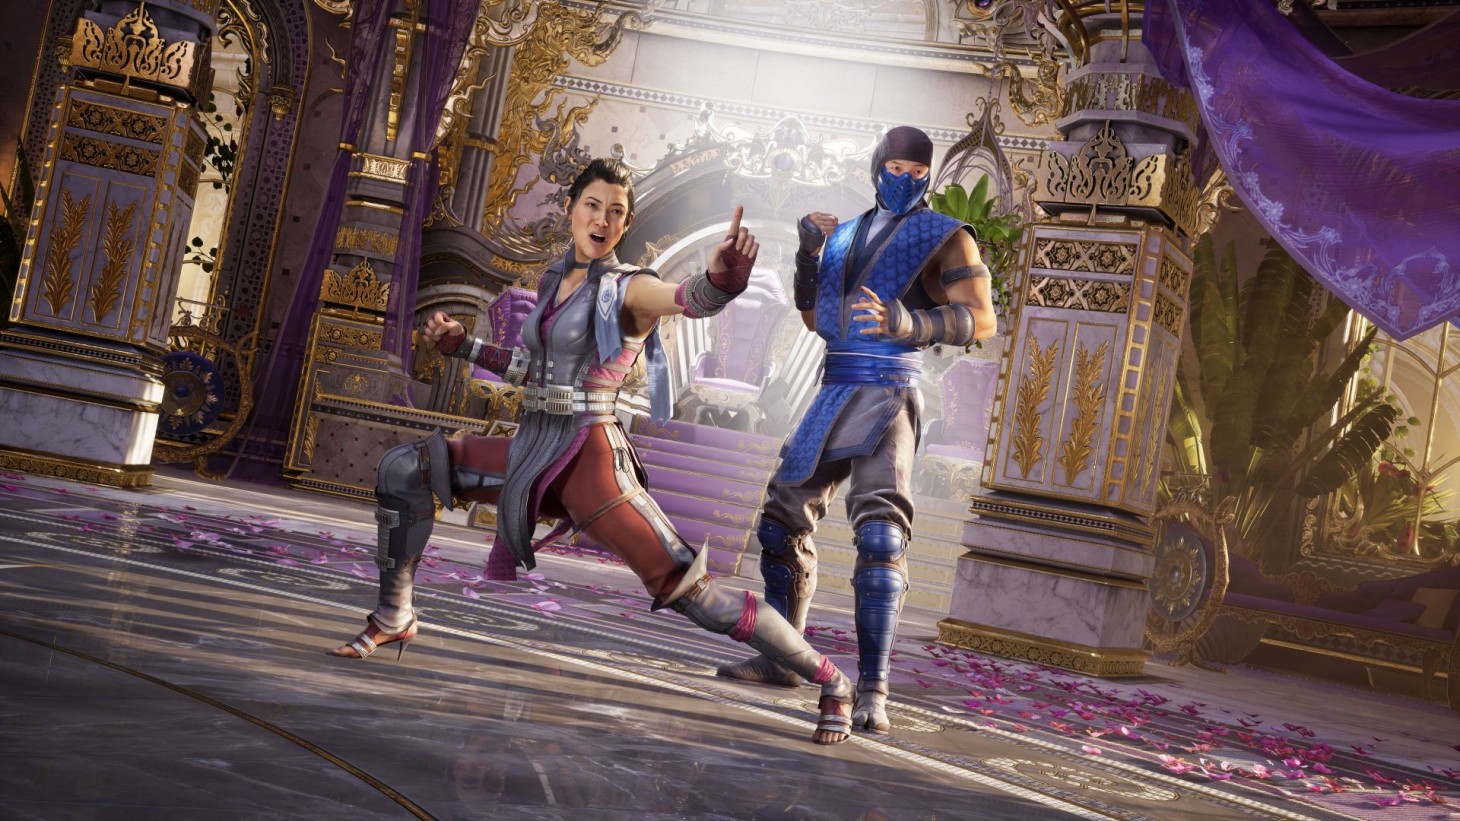 Mortal Kombat 11 Review: A gory, hilarious, and over-the-top